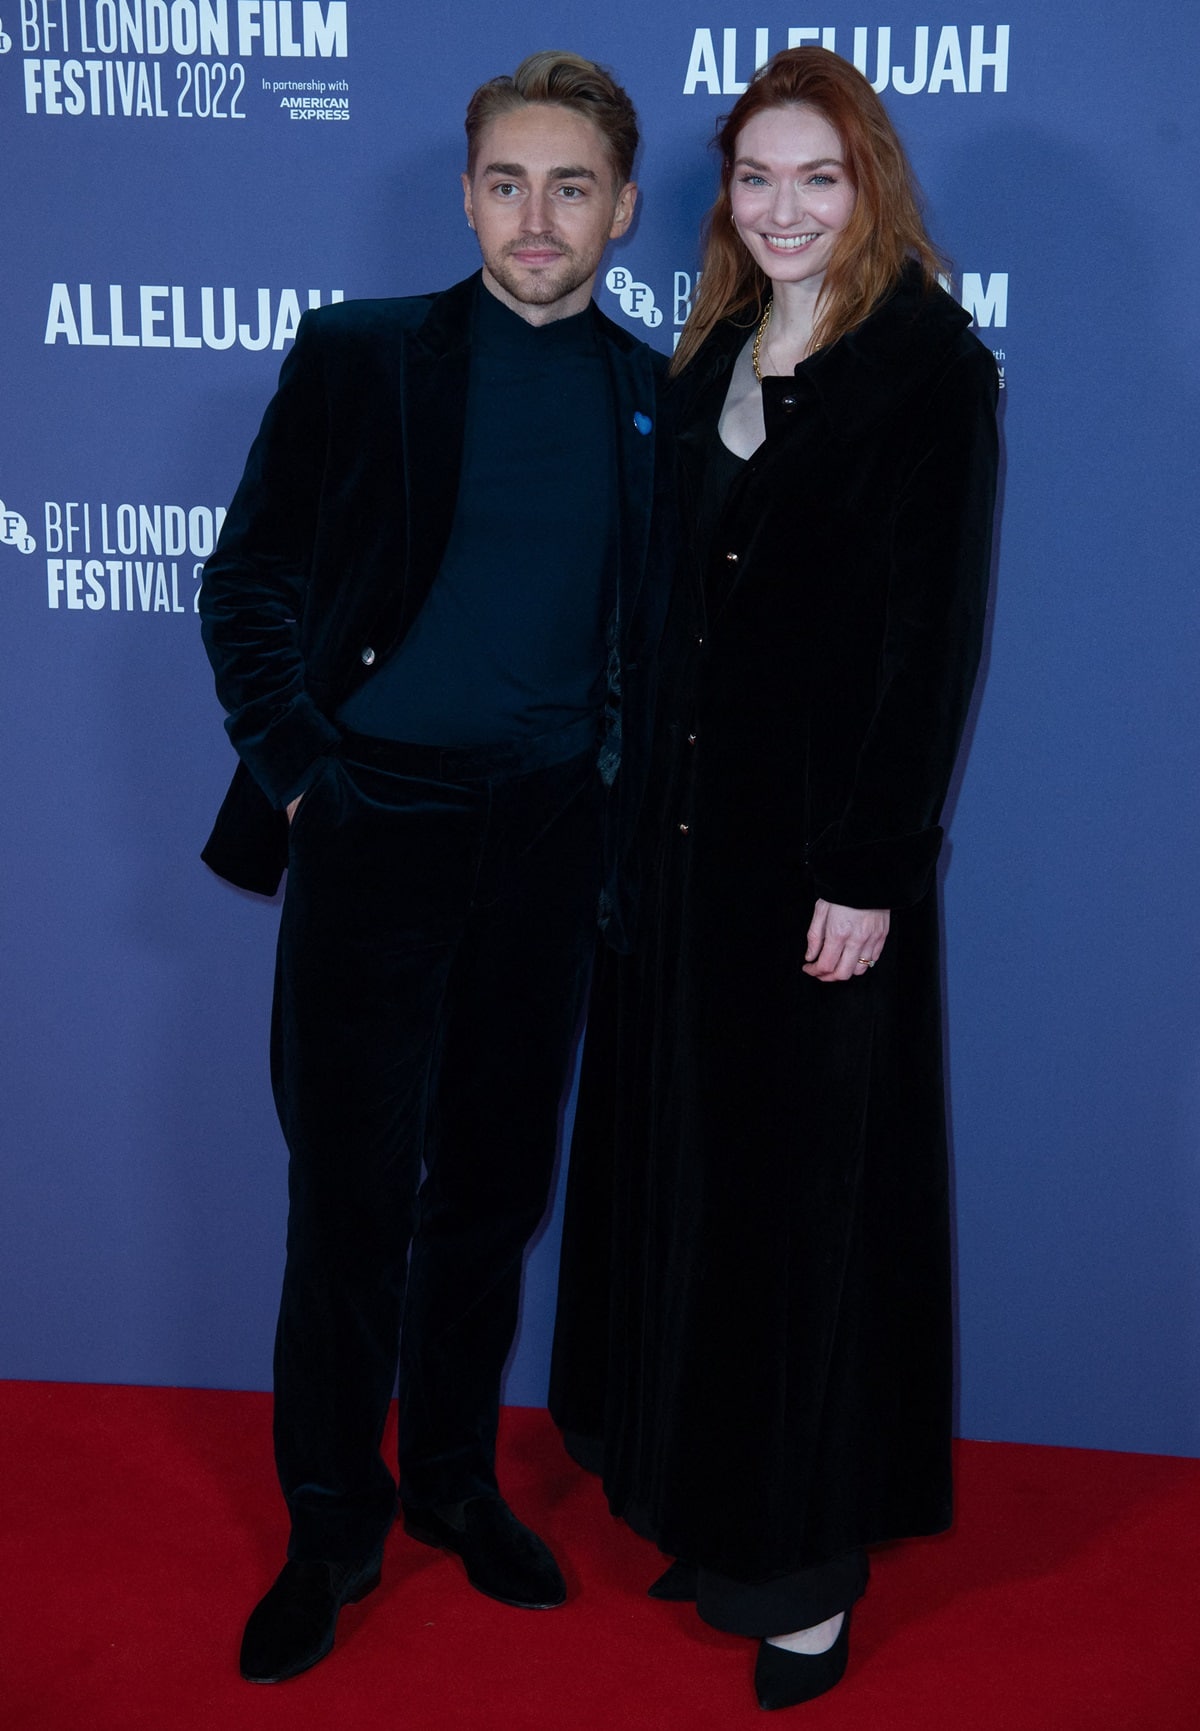 Ross Tomlinson and his sister Eleanor Tomlinson attend the "Allelujah" European Premiere